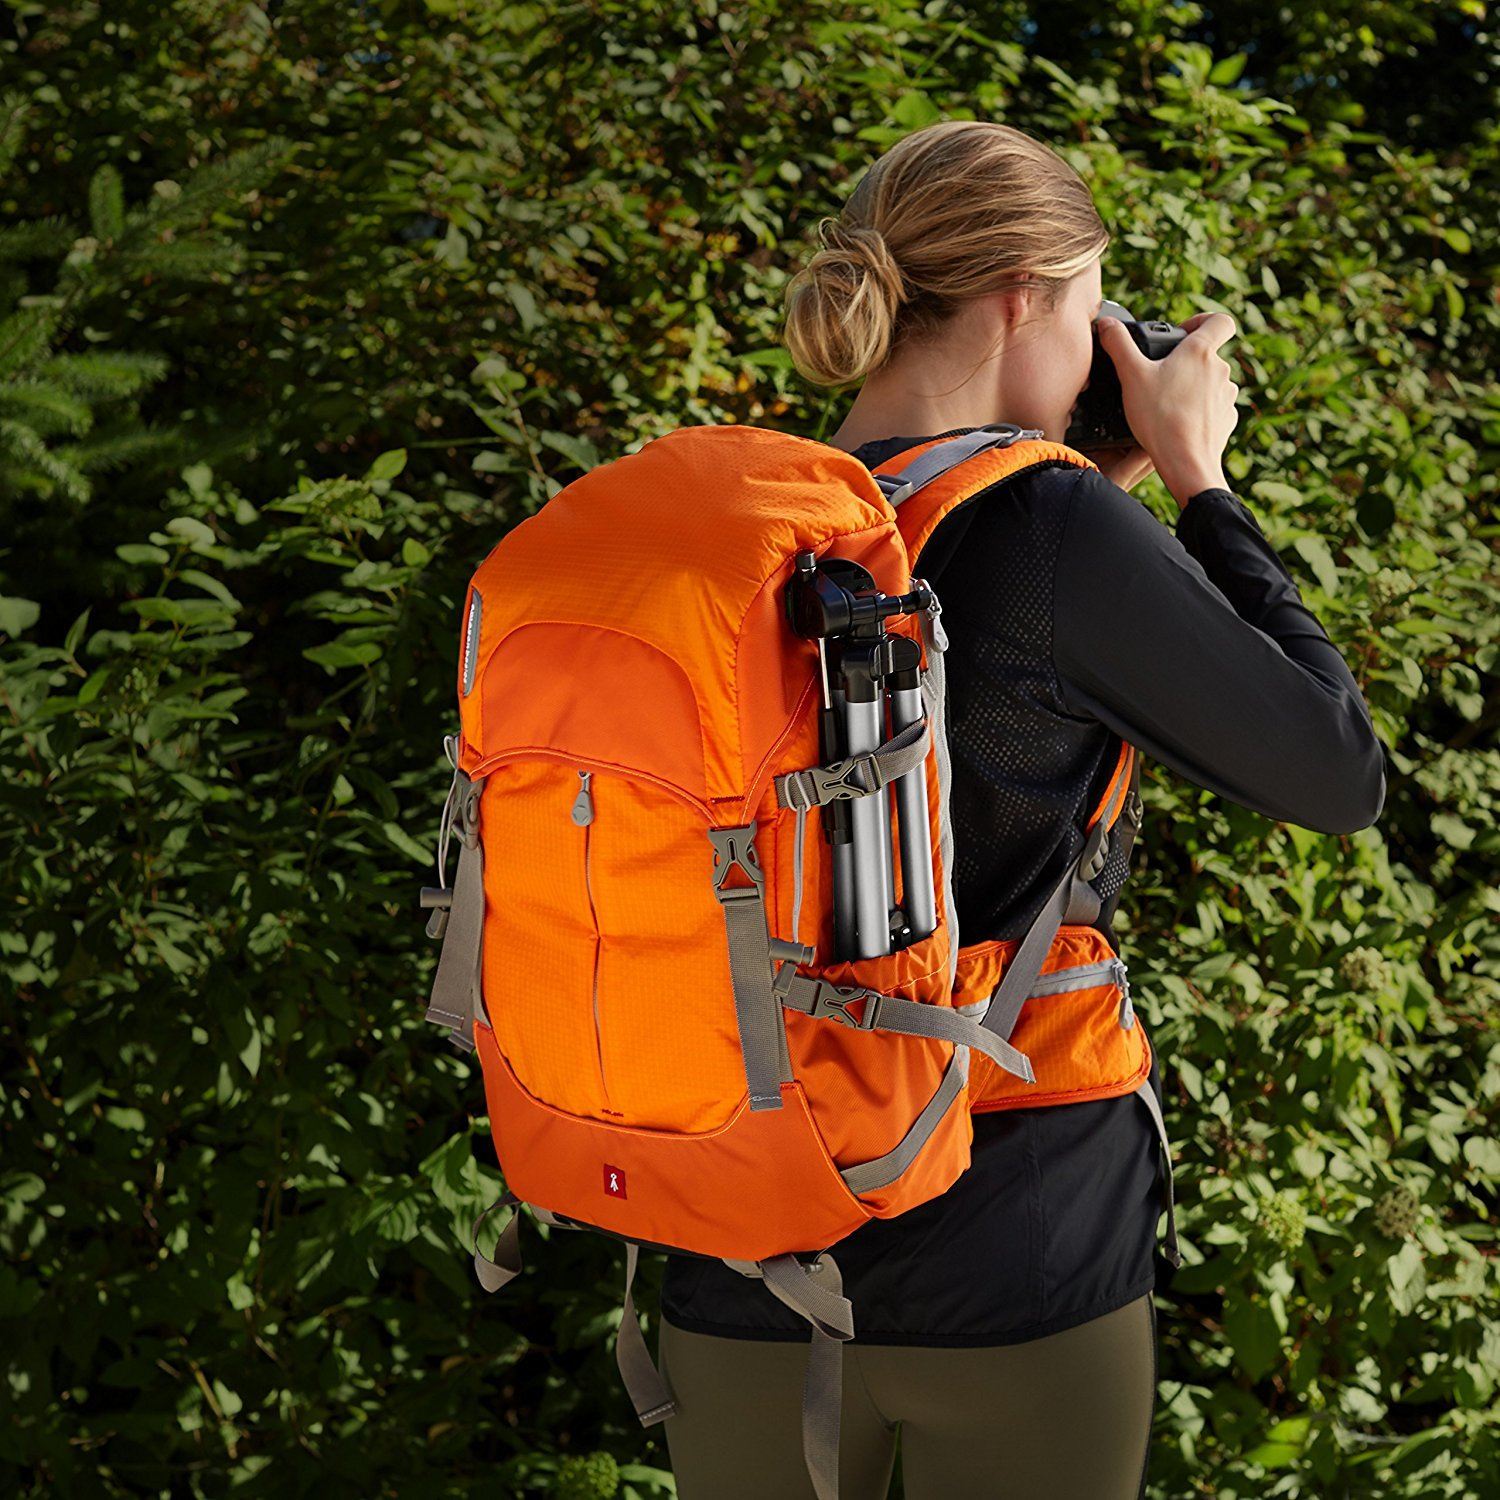 10 Must-Have Camping Gear With Low Budget For Nature Enthusiasts